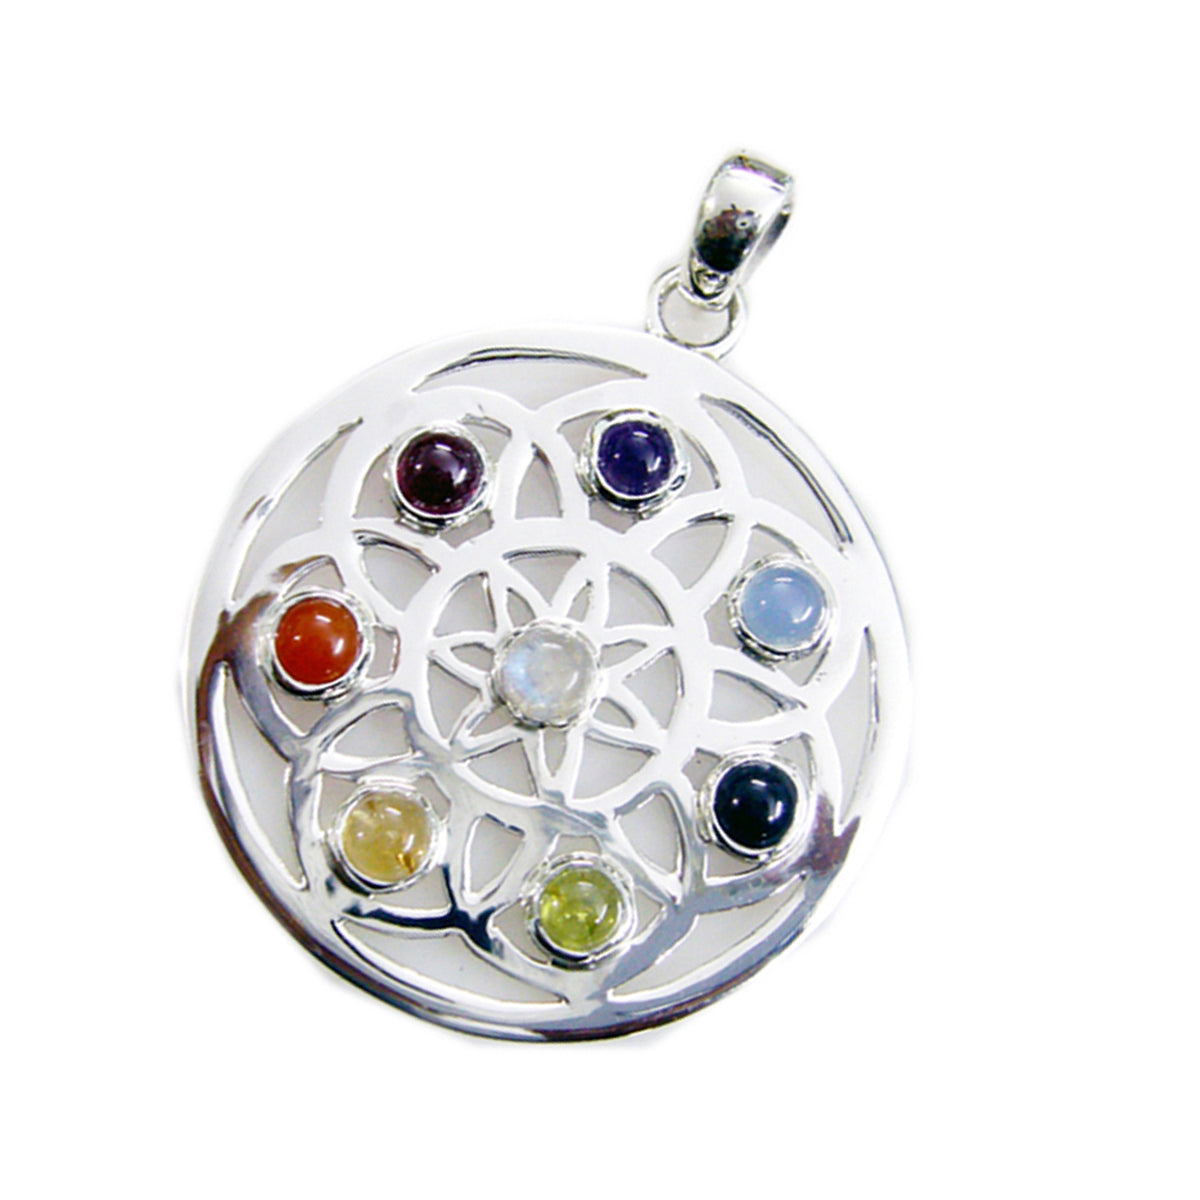 Riyo Stunning Gems Round Cabochon Multi Color Multi Stone Solid Silver Pendant Gift For Good Friday